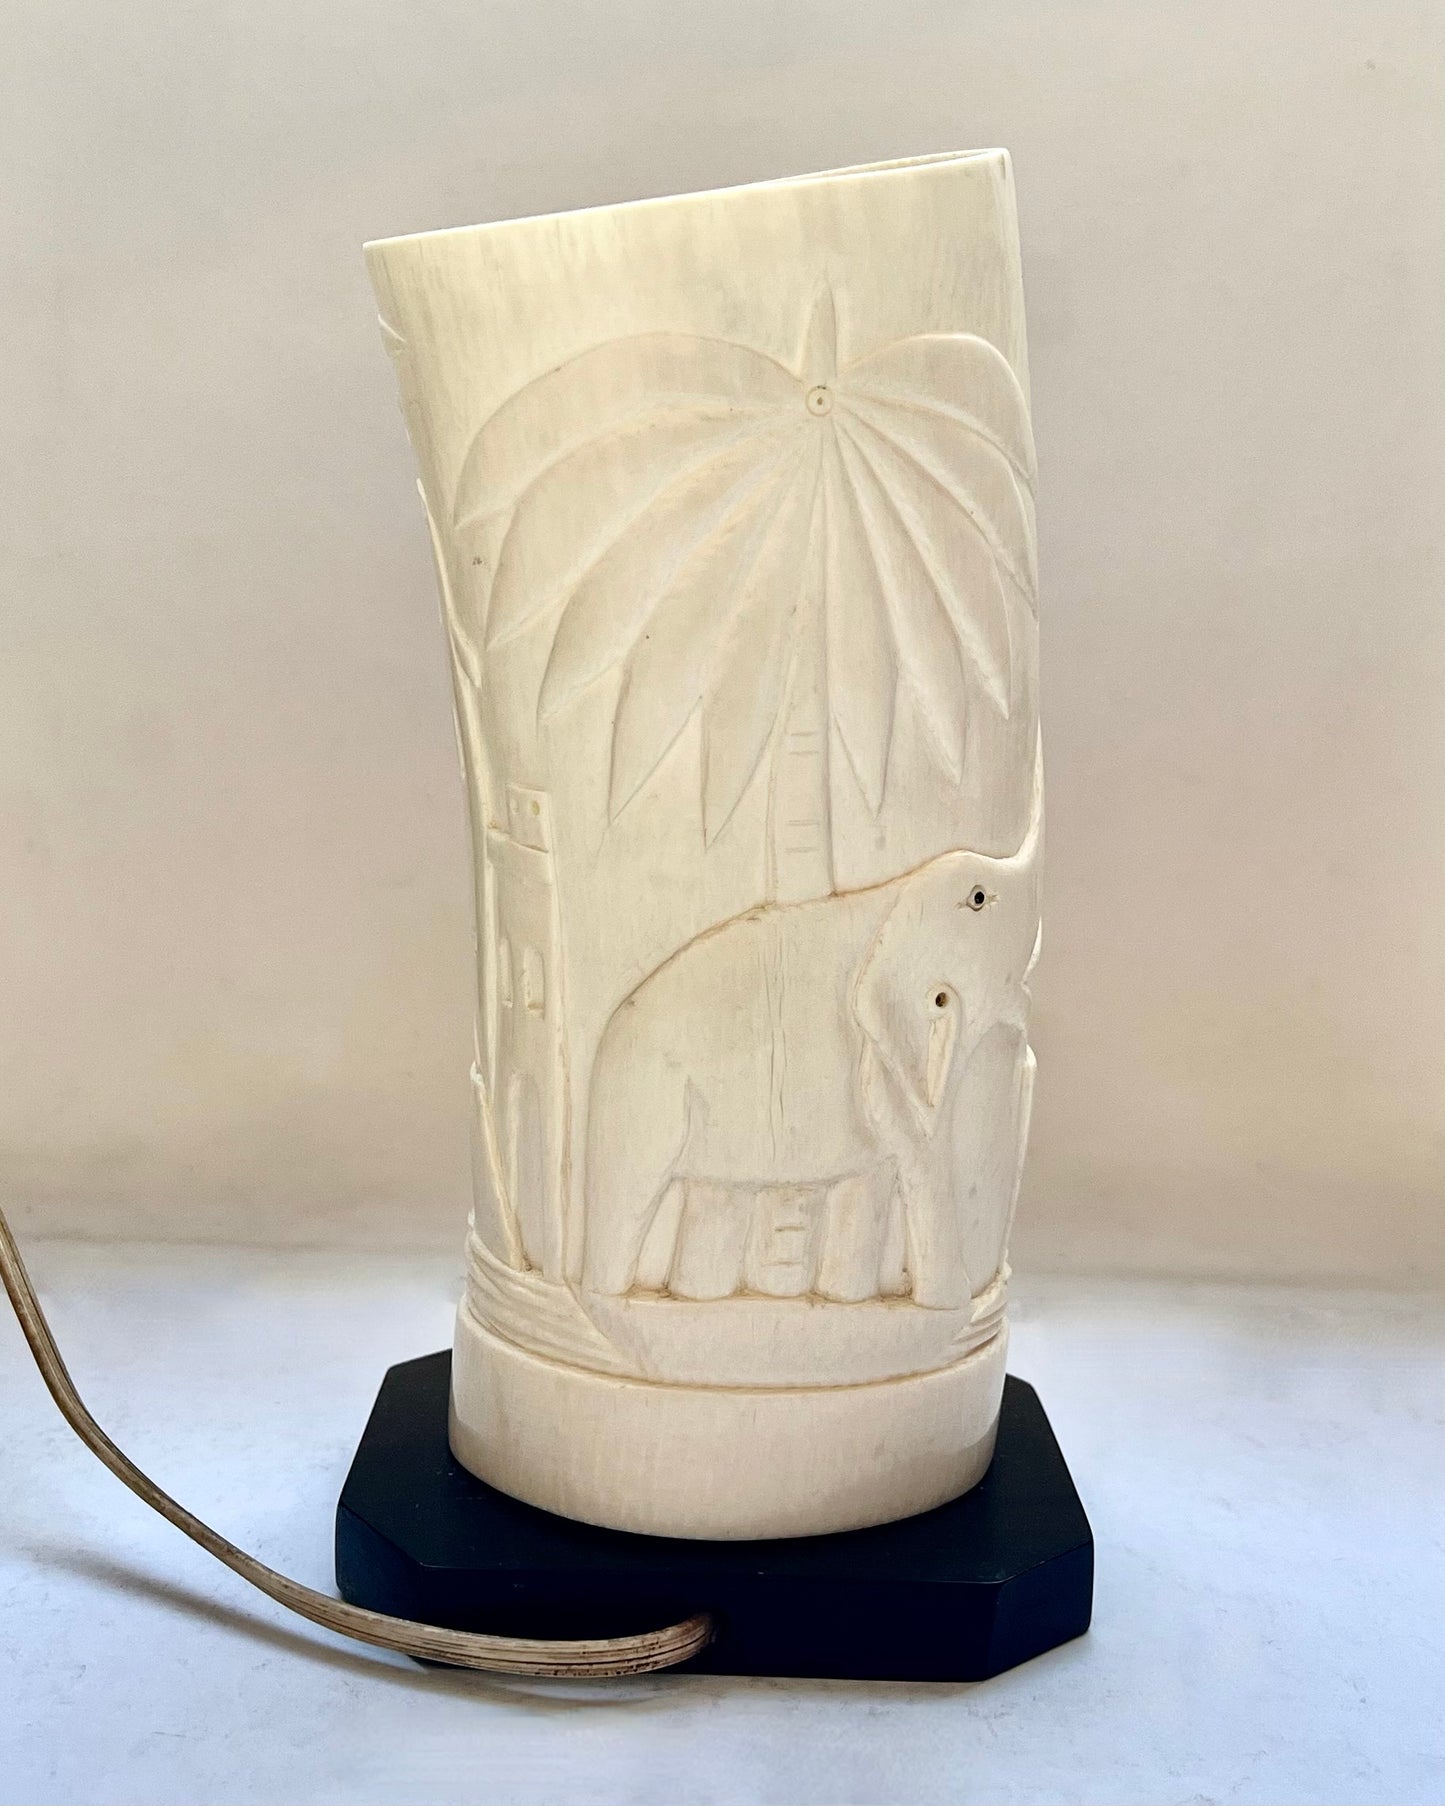 Stunning antique African ivory lamp circa 1920s to 1930s